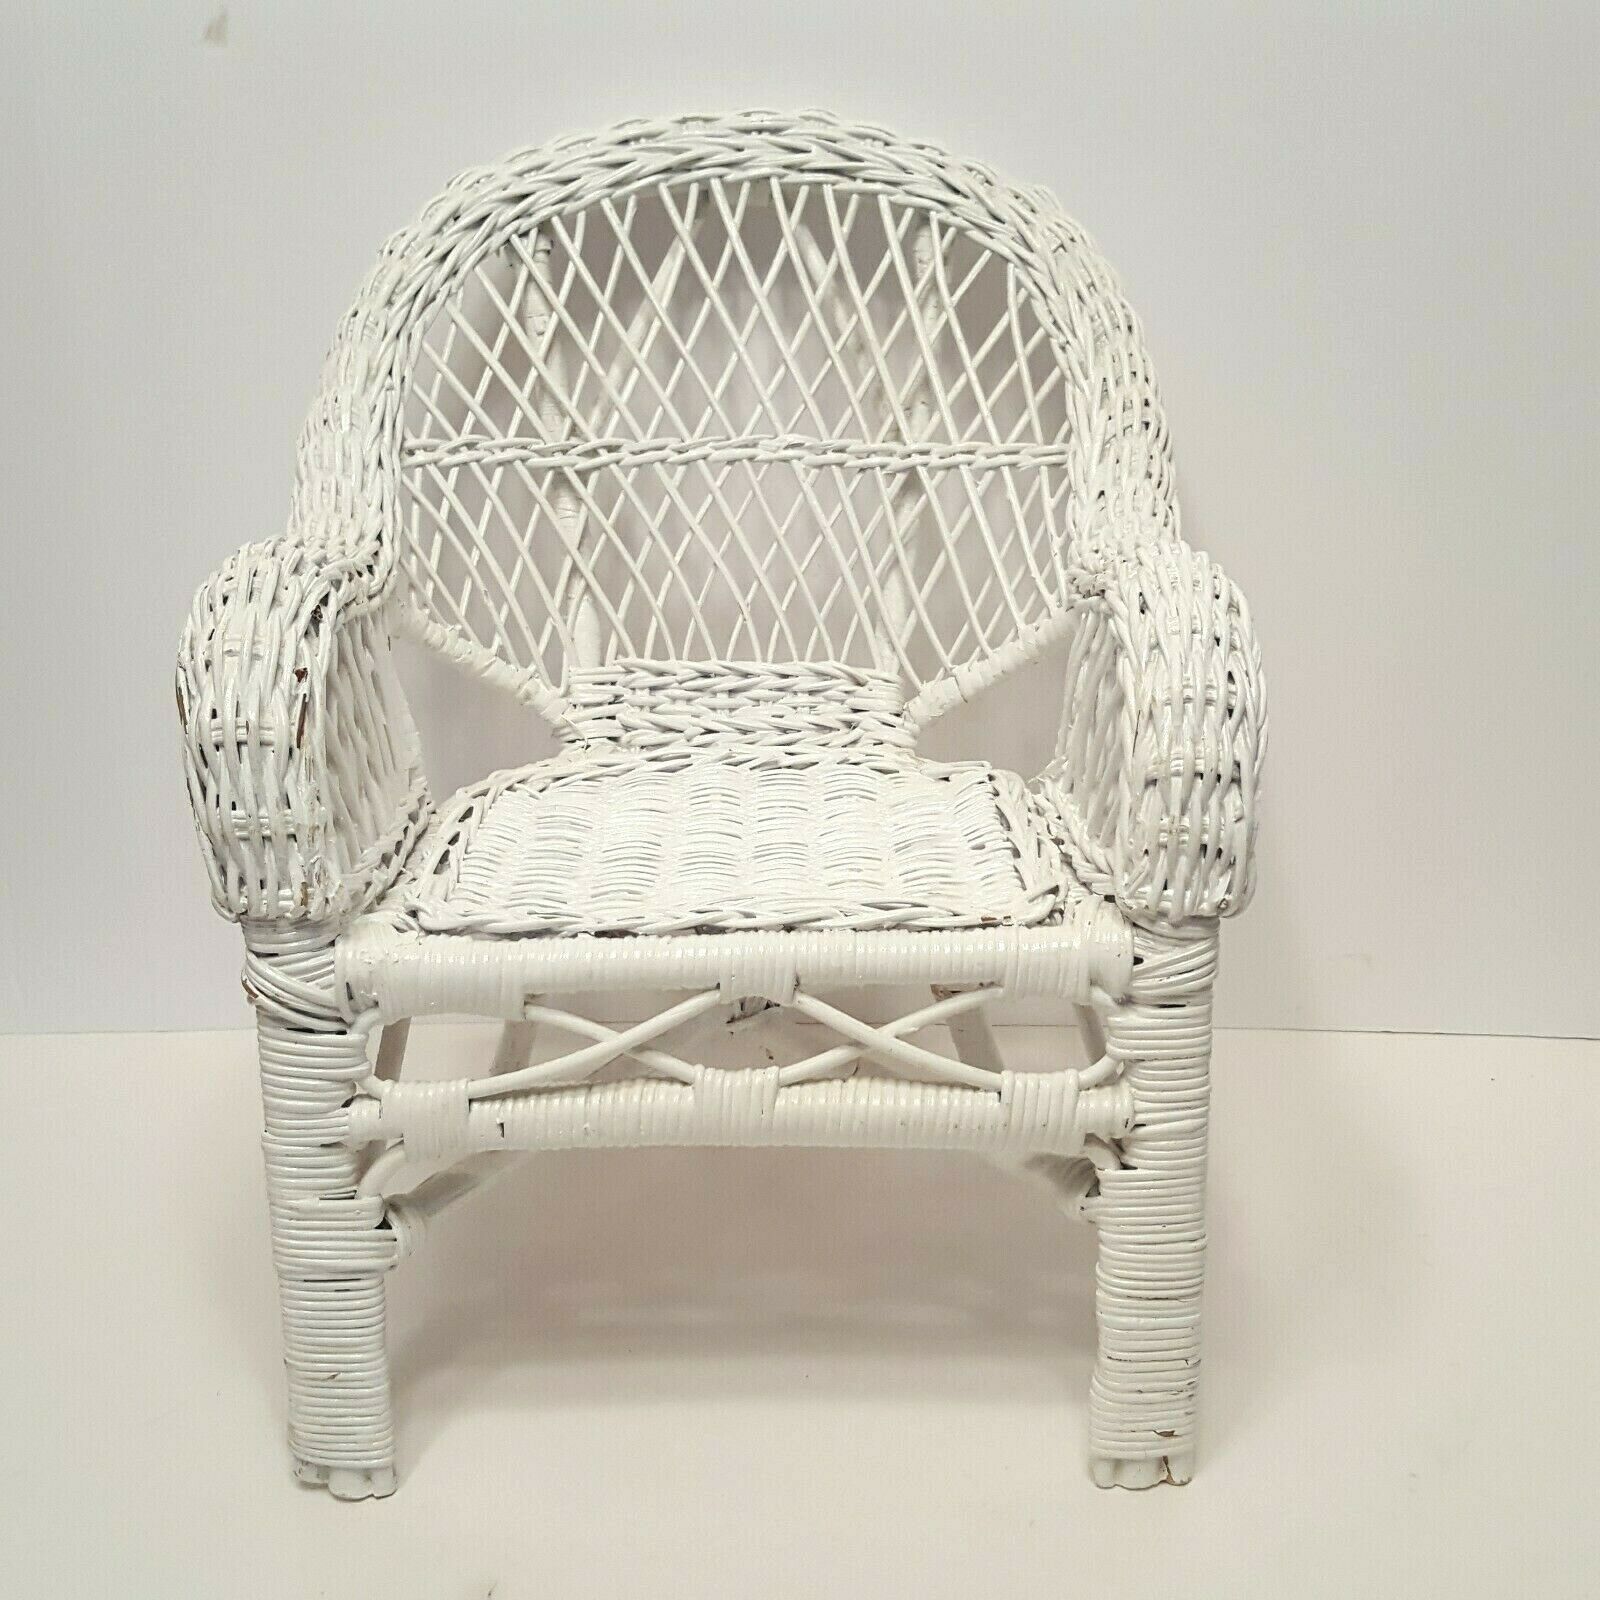 White Wicker Chair For Doll/bear Furniture 13" Tall